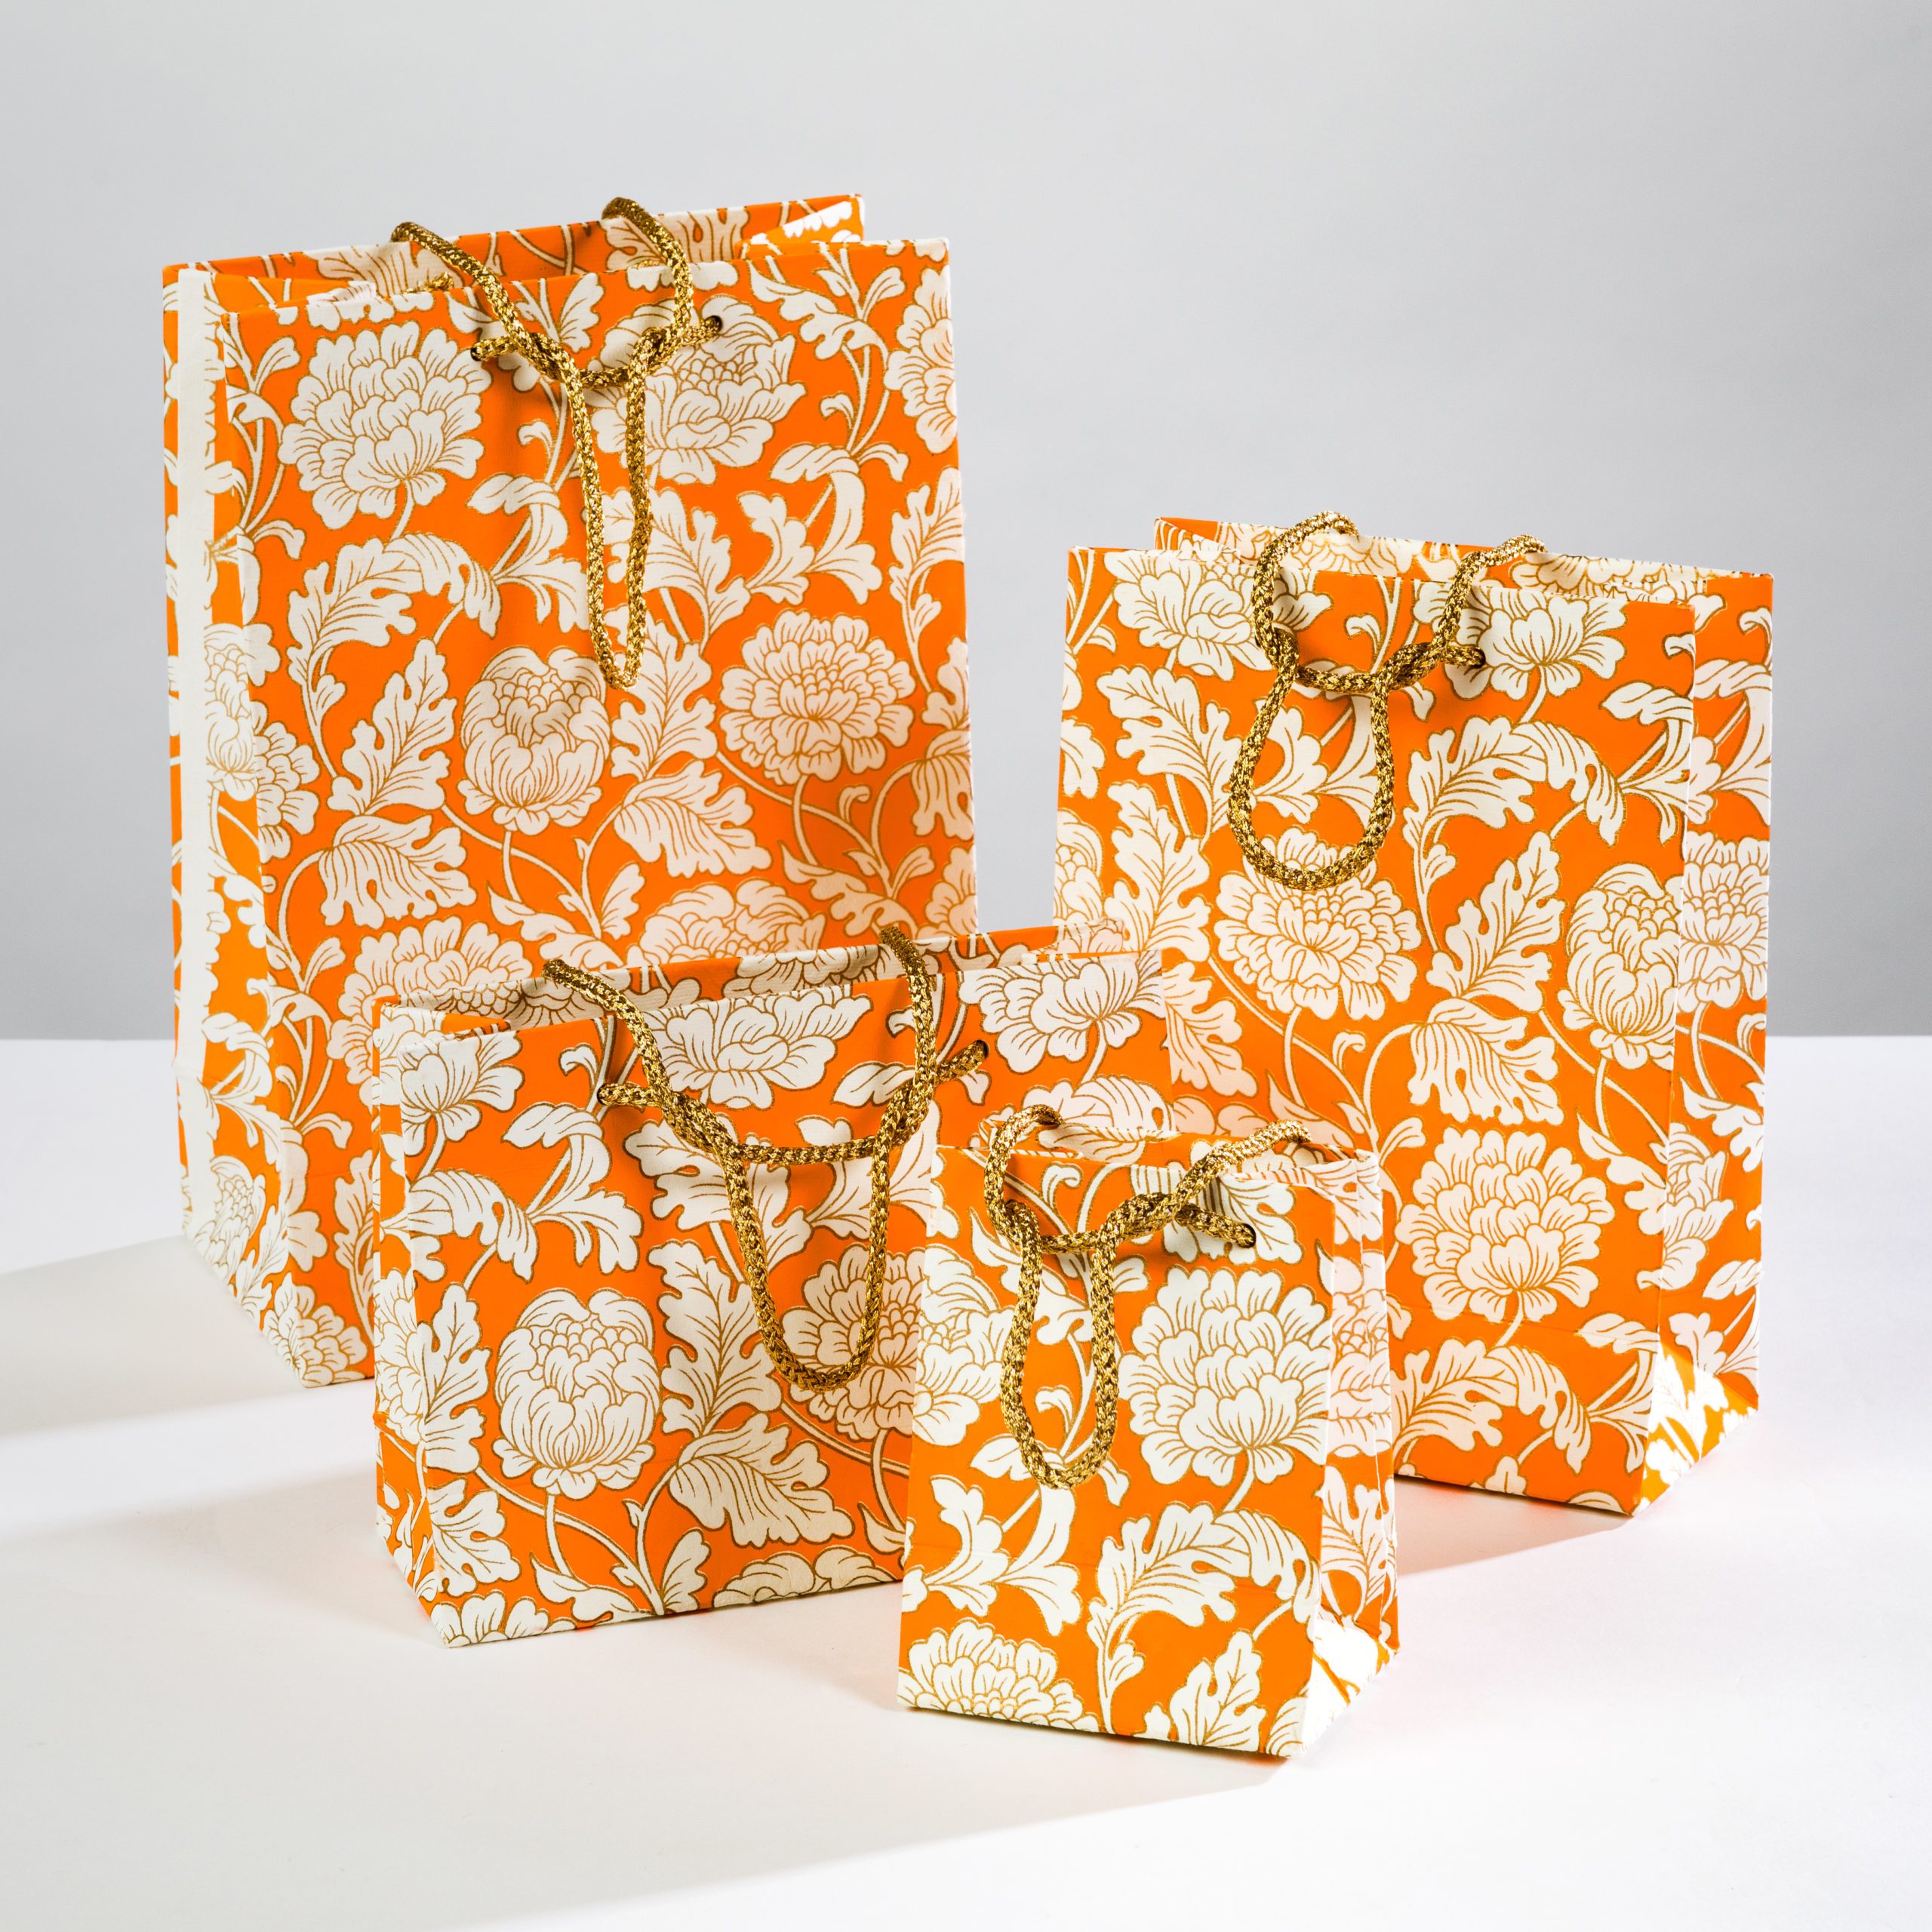 Orange Floral gift bags add a touch of elegance to any occassion.